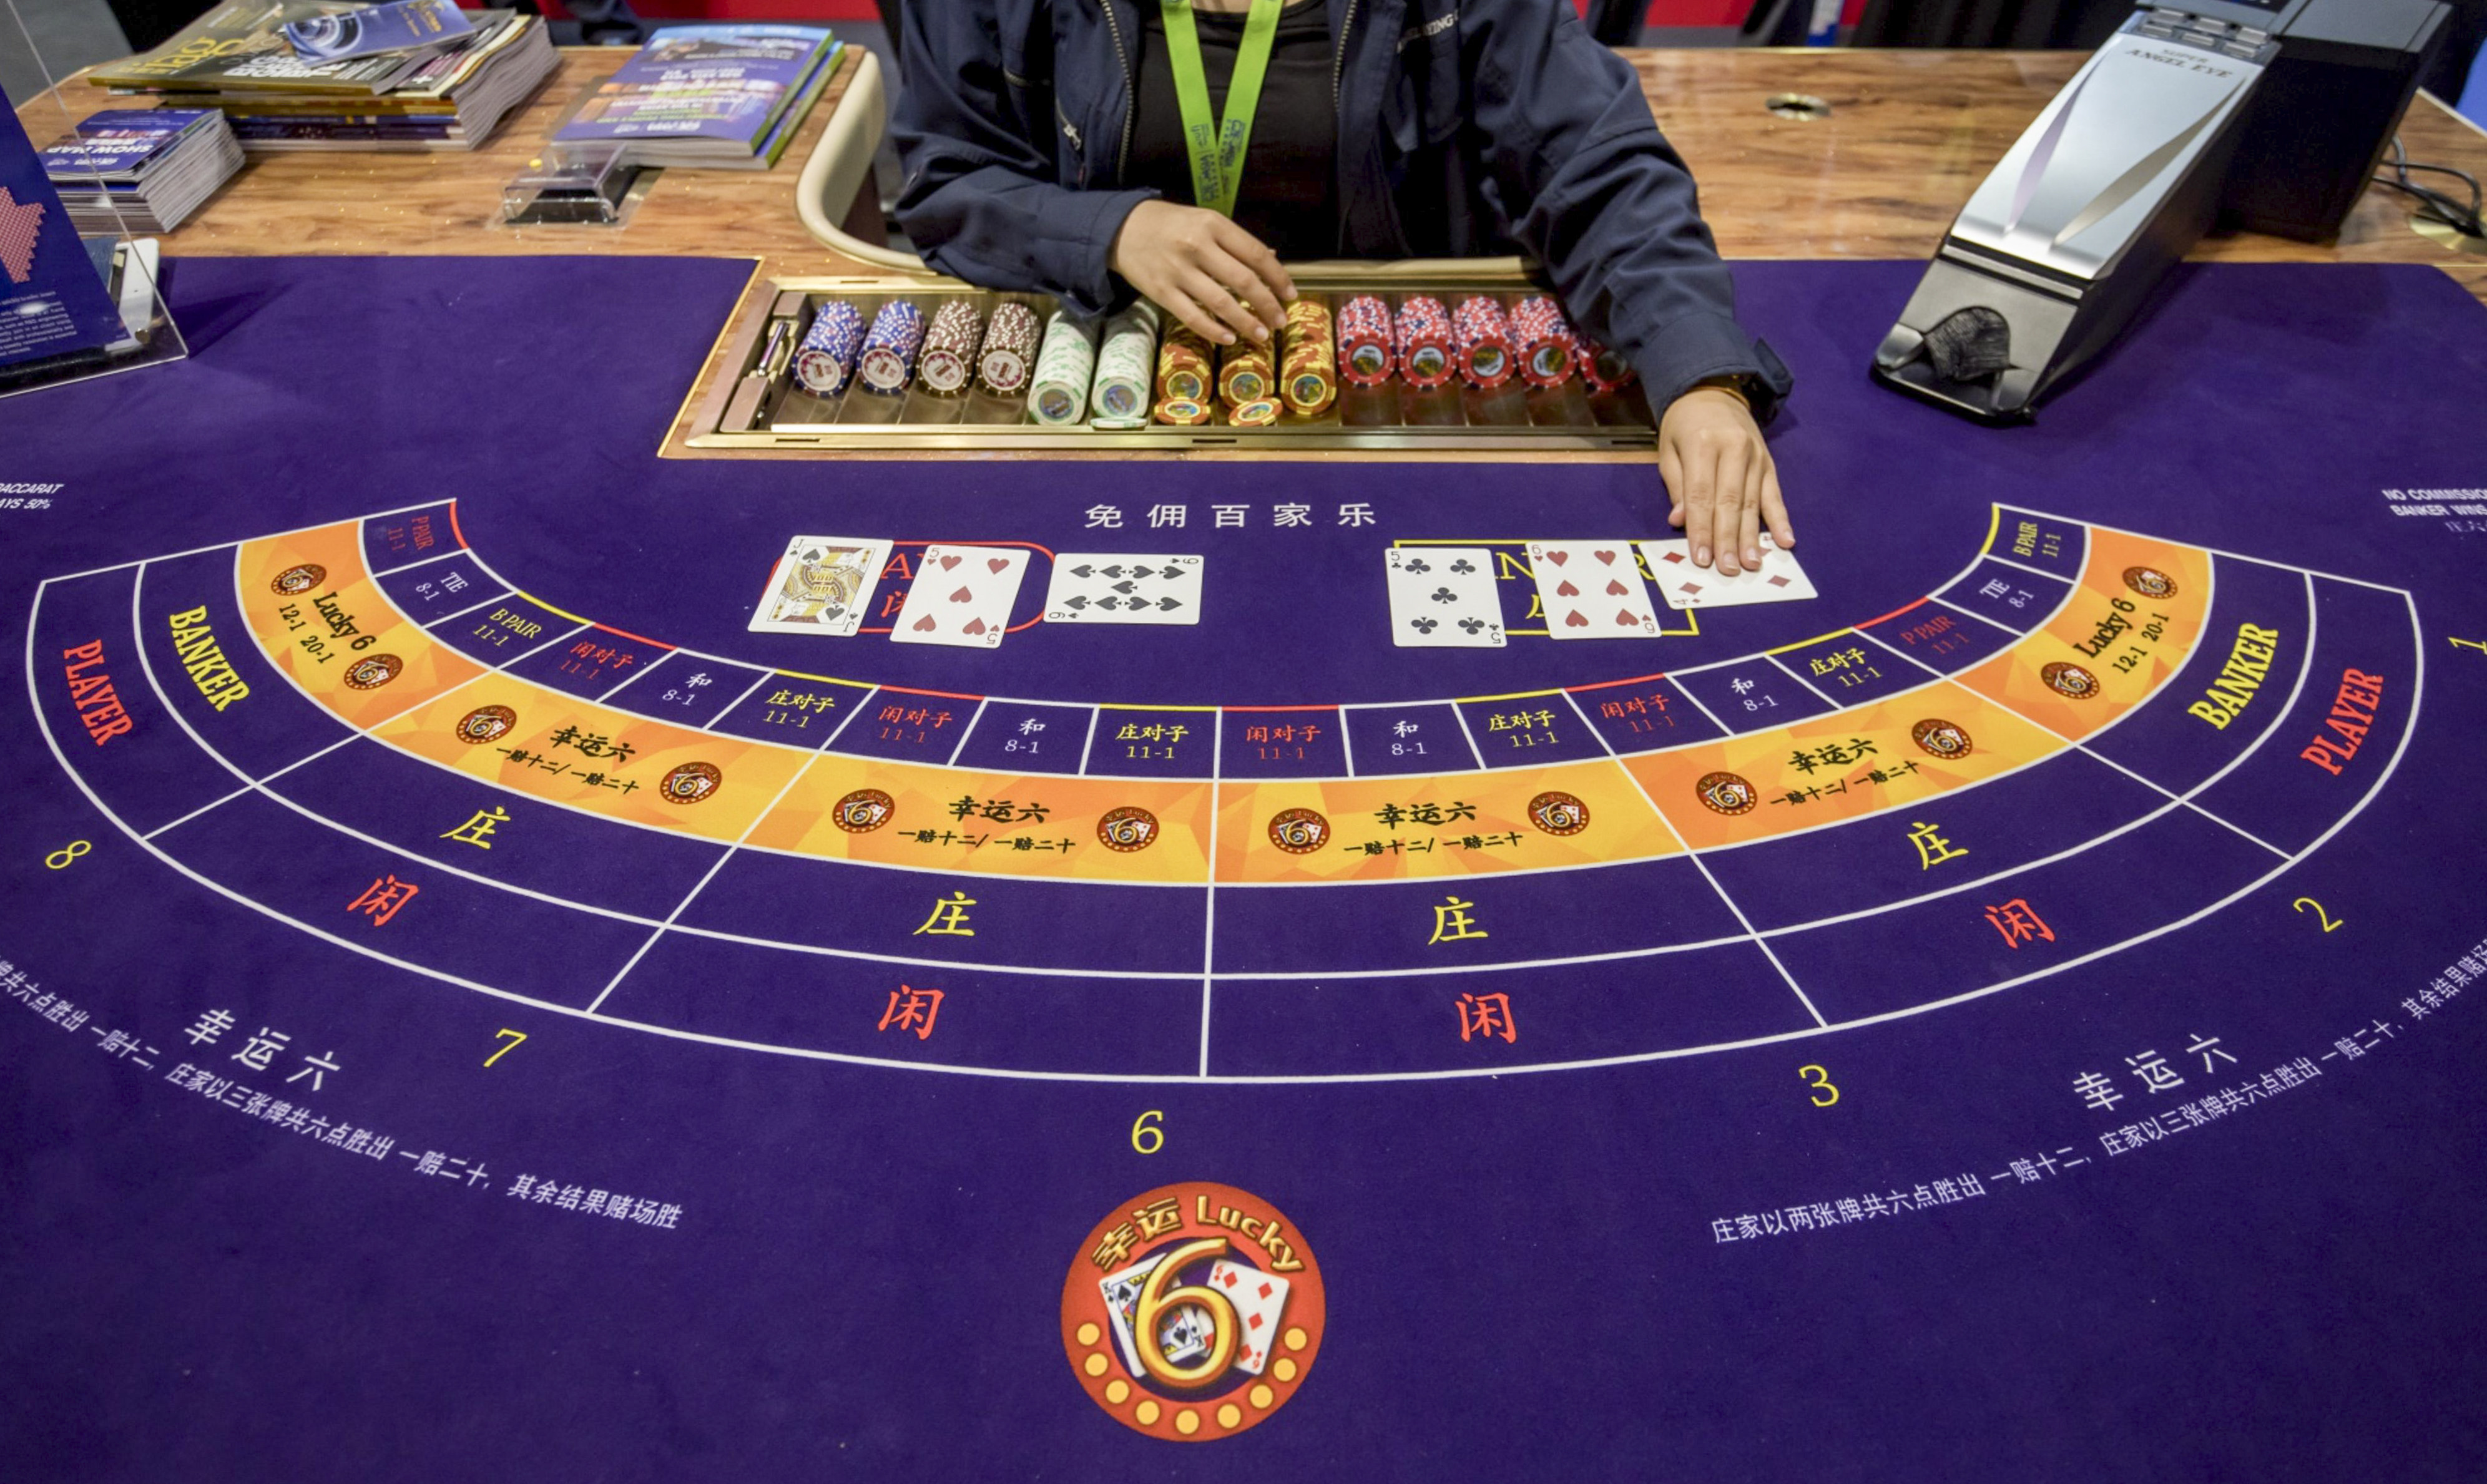 Are Macau's days as a global gambling hub numbered? Casino capital faces drastic upheaval as China tightens its grip | South China Morning Post